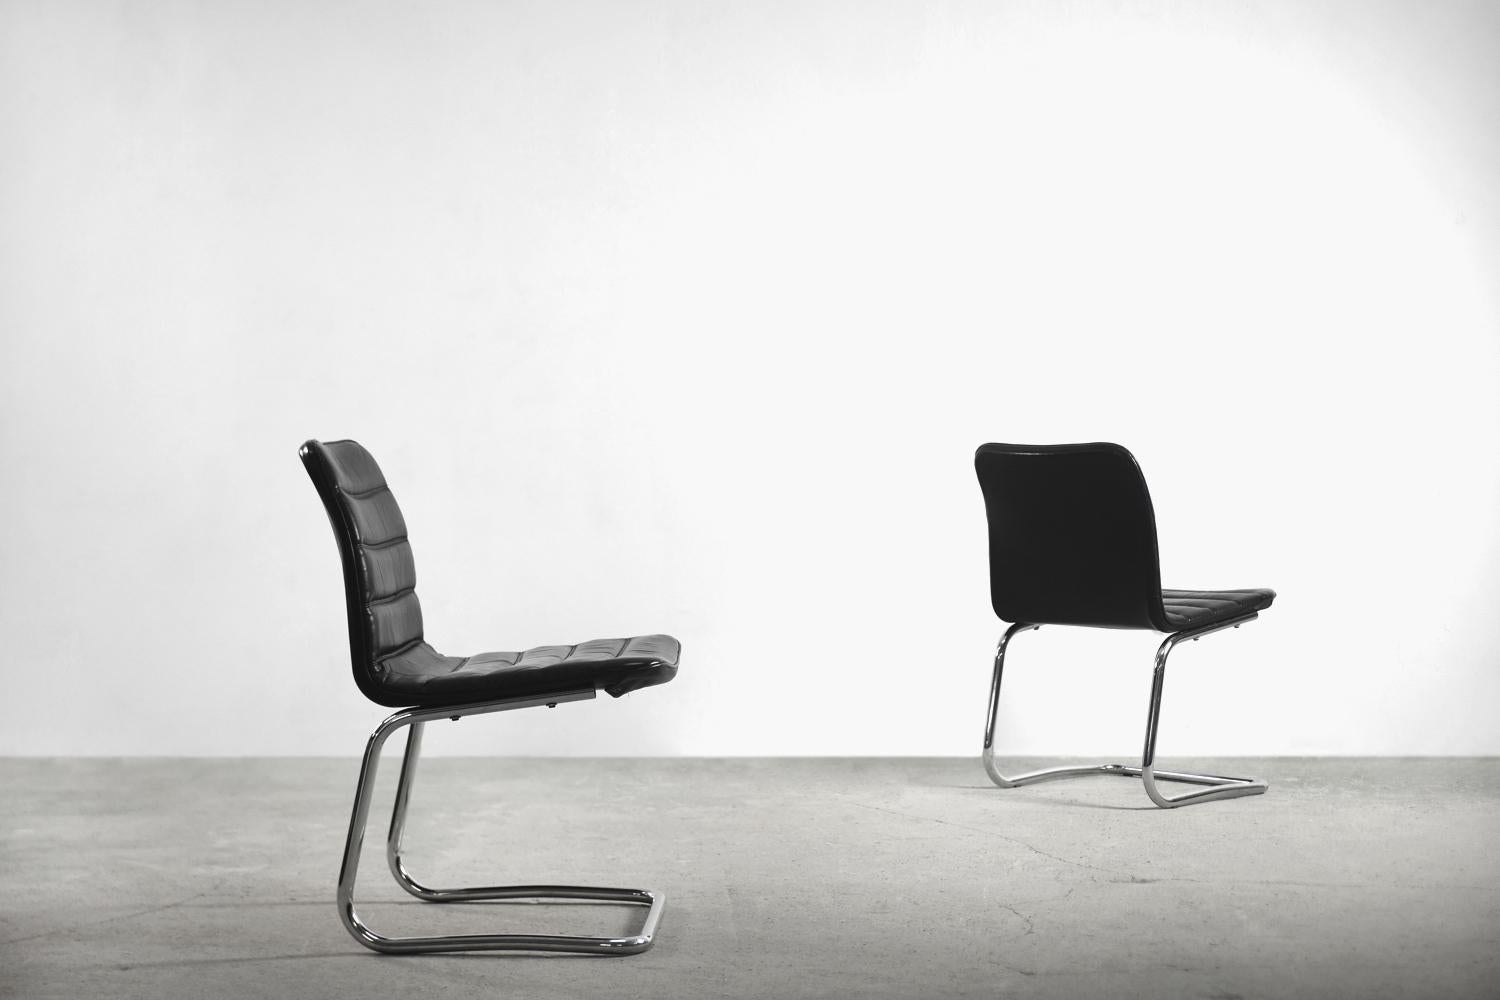 This set of two minimalist chairs was manufactured in Germany by Pol International during 1960s. The camber seats were upholstered in black leather with oblong seams. The minimalist base is made from chrome-plated steel. The finest quality made in